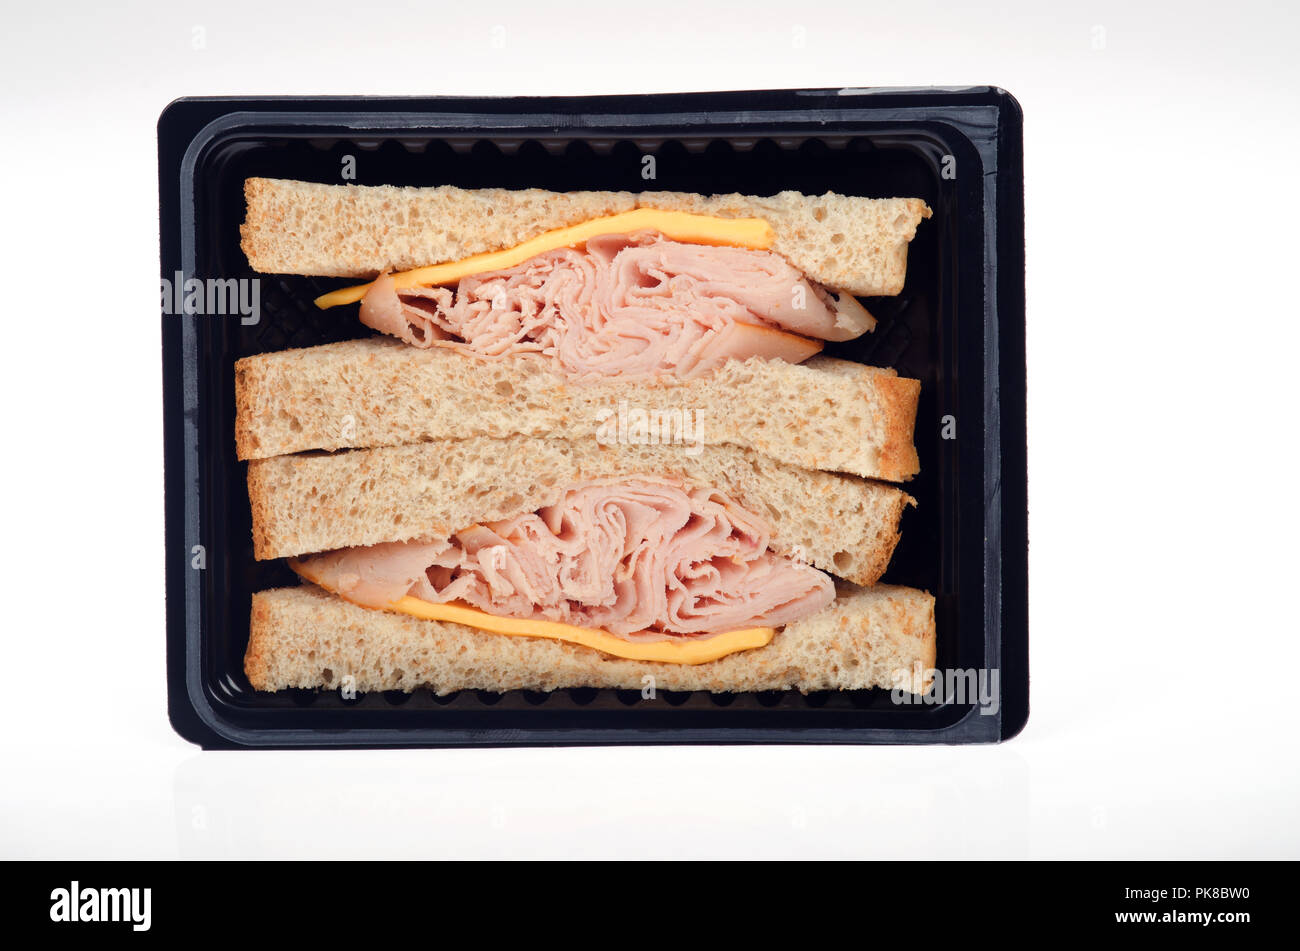 Takeaway  prepared smoked turkey and cheese sandwich on wheat bread in a black packet on white background Stock Photo